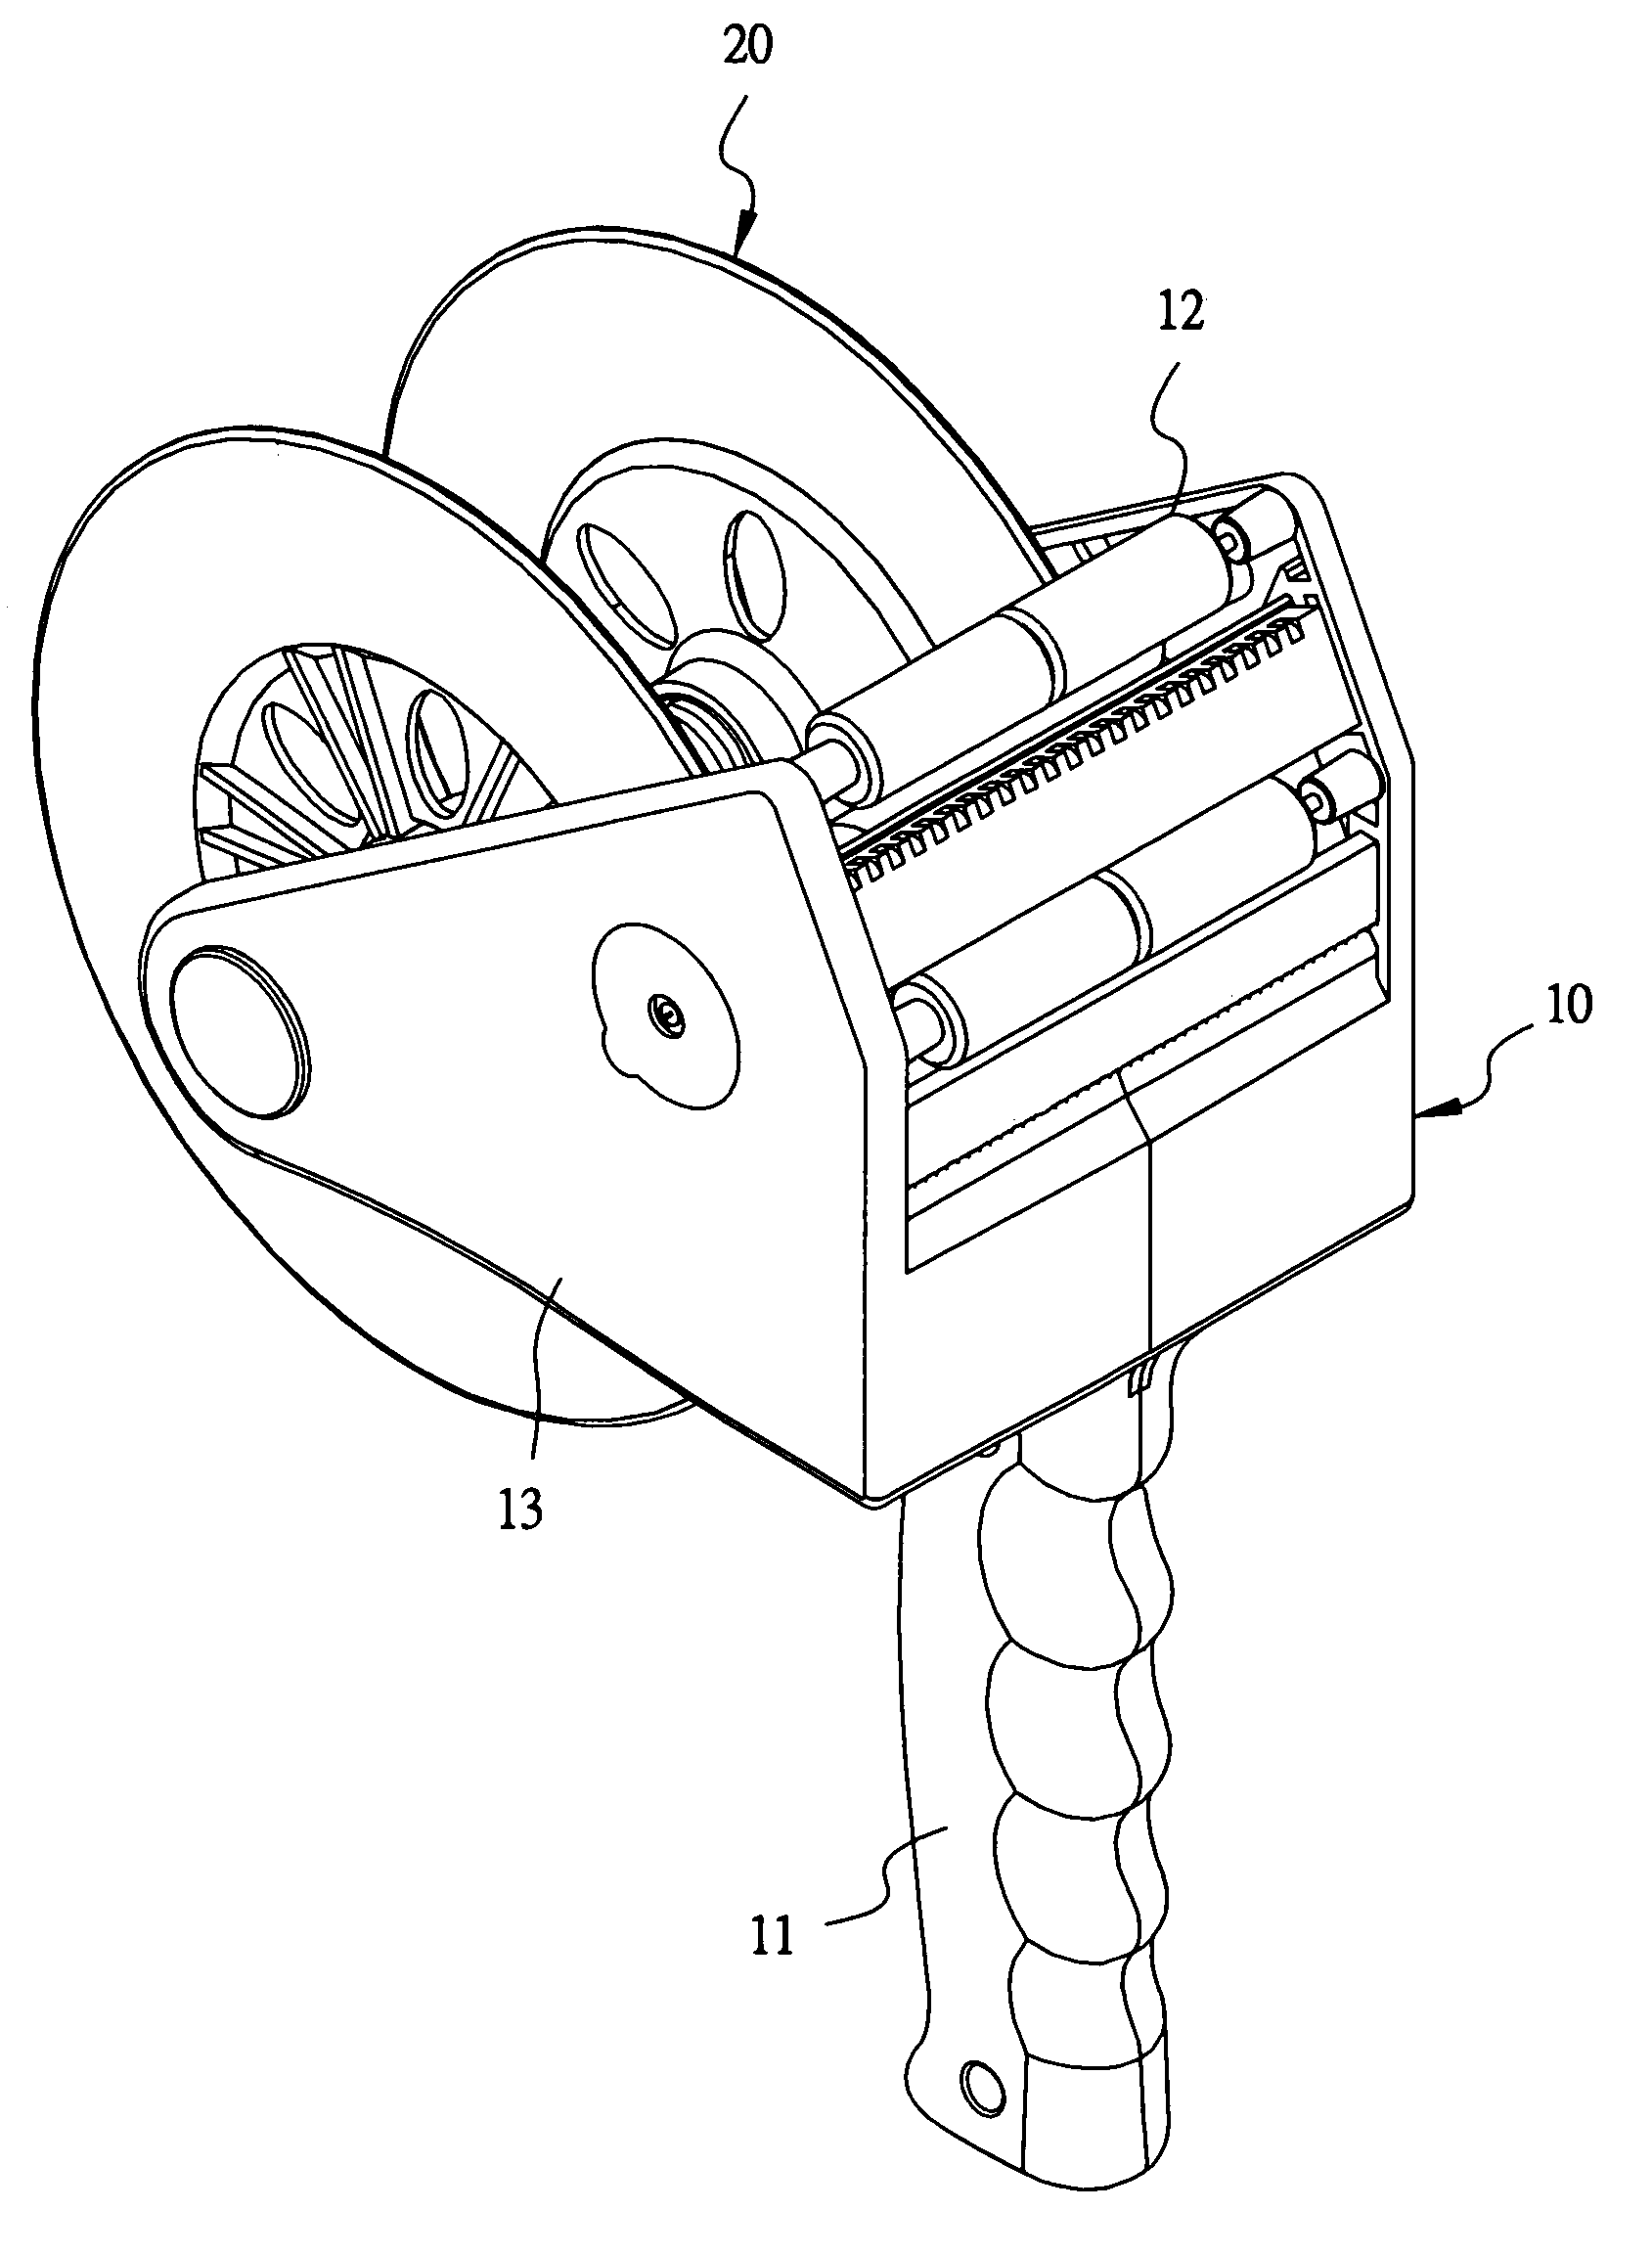 Tape-roll supporting device